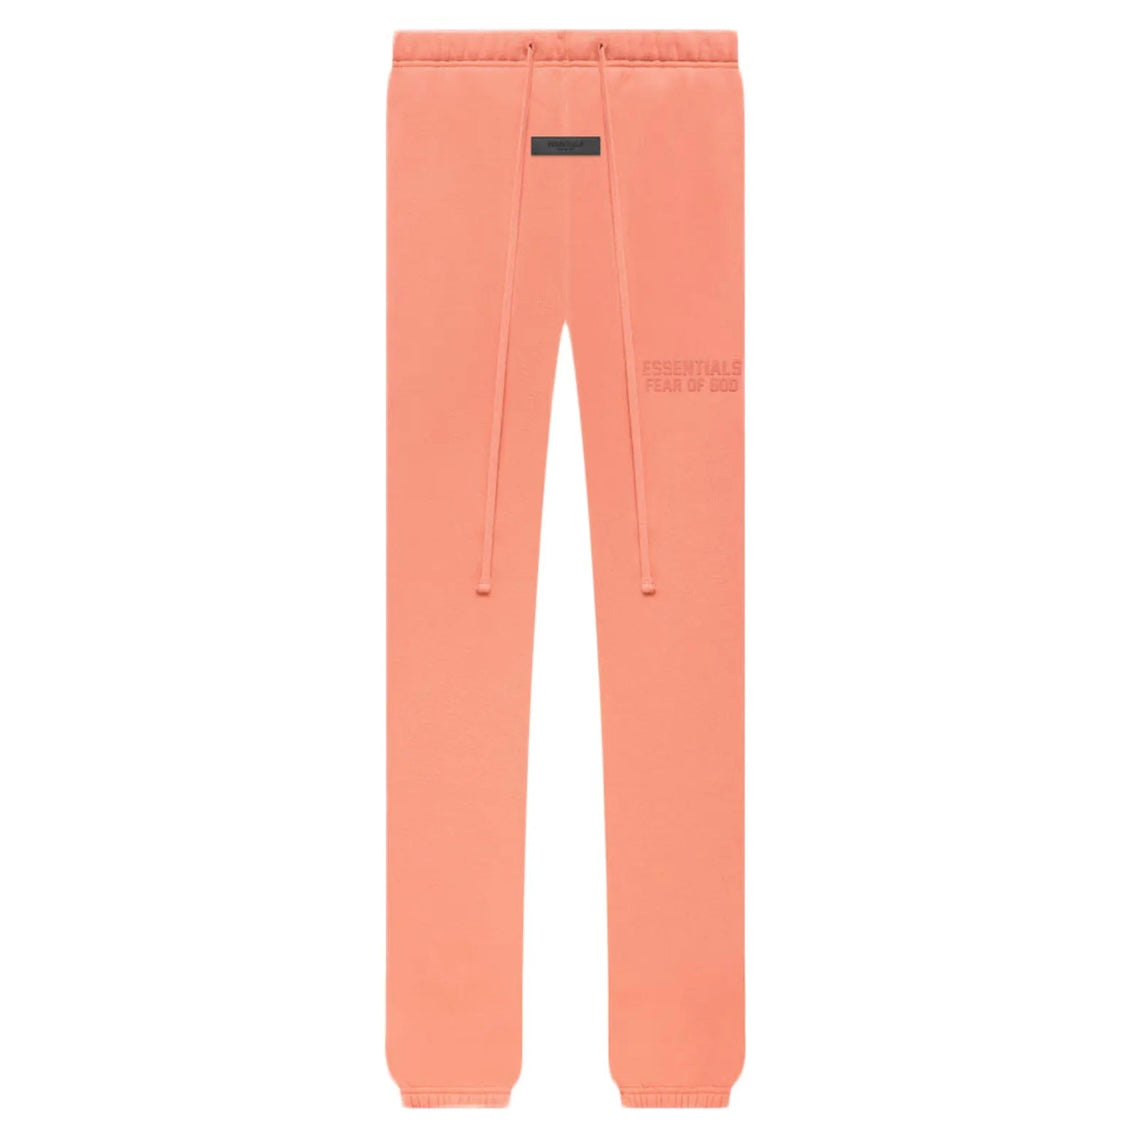 Fear of God Essentials Coral Sweatpants Front VIew